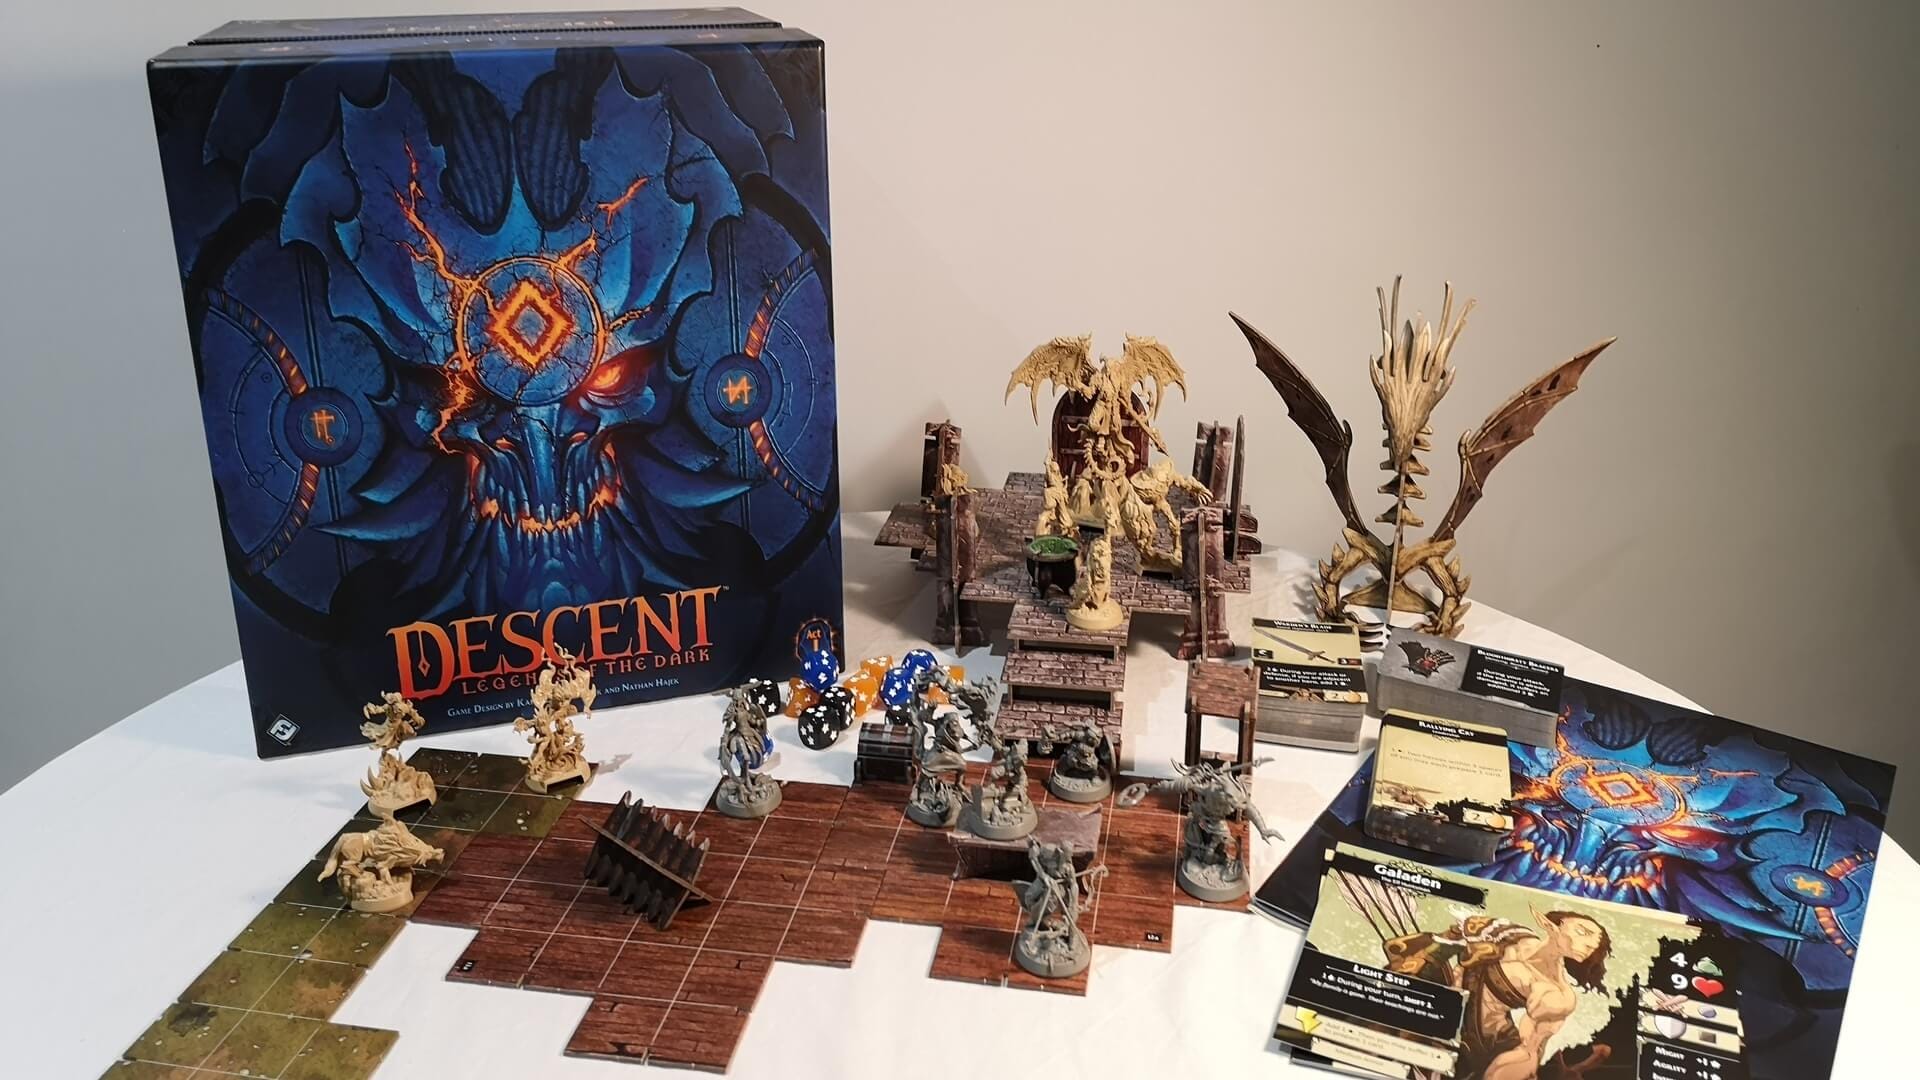 Descent: Legends of the Dark designers on why it's not a Journeys